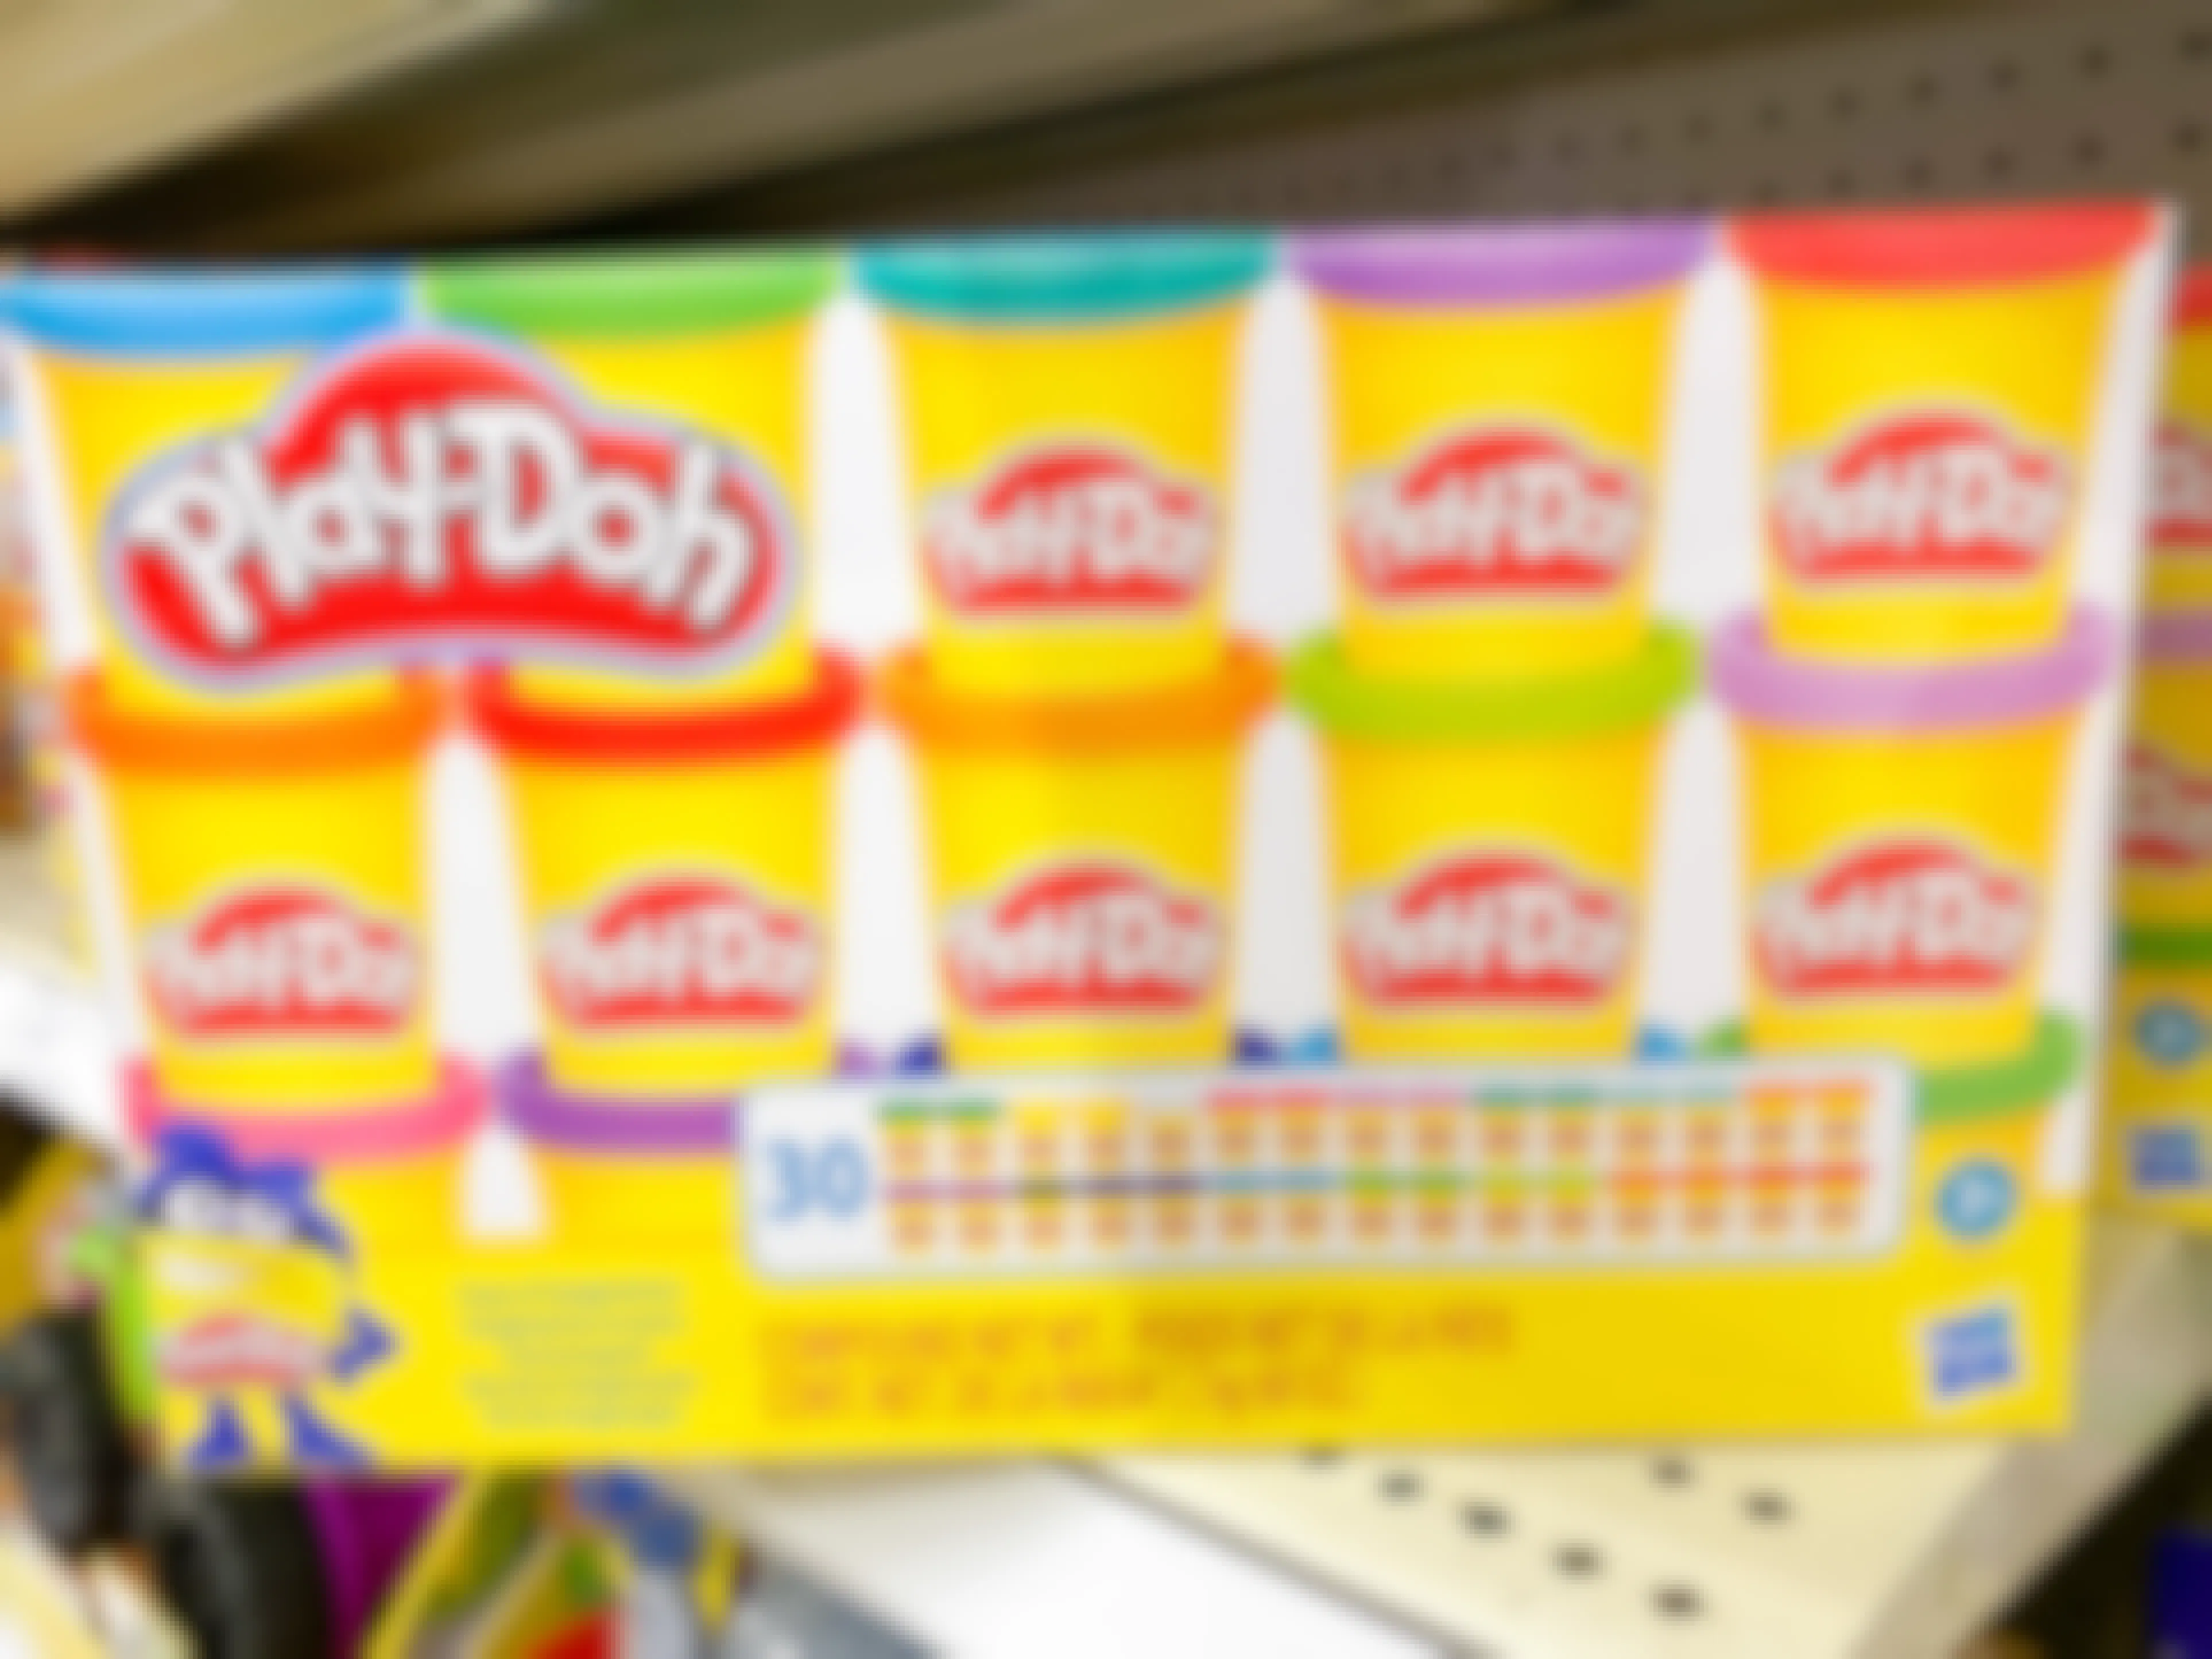 A box set of Play Doh on a shelf at Target.